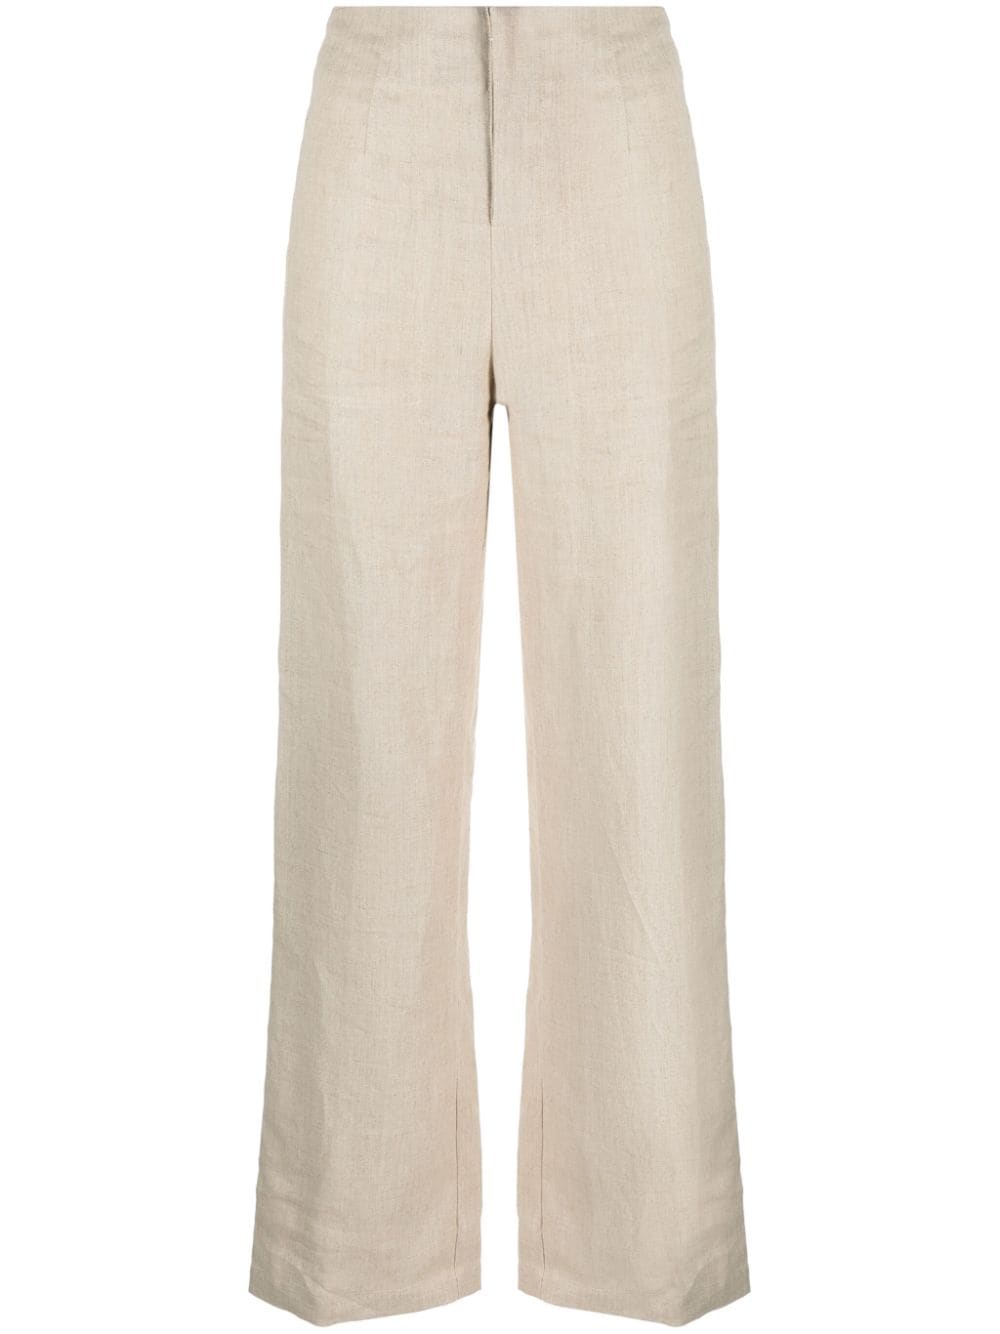 Isotta linen trousers